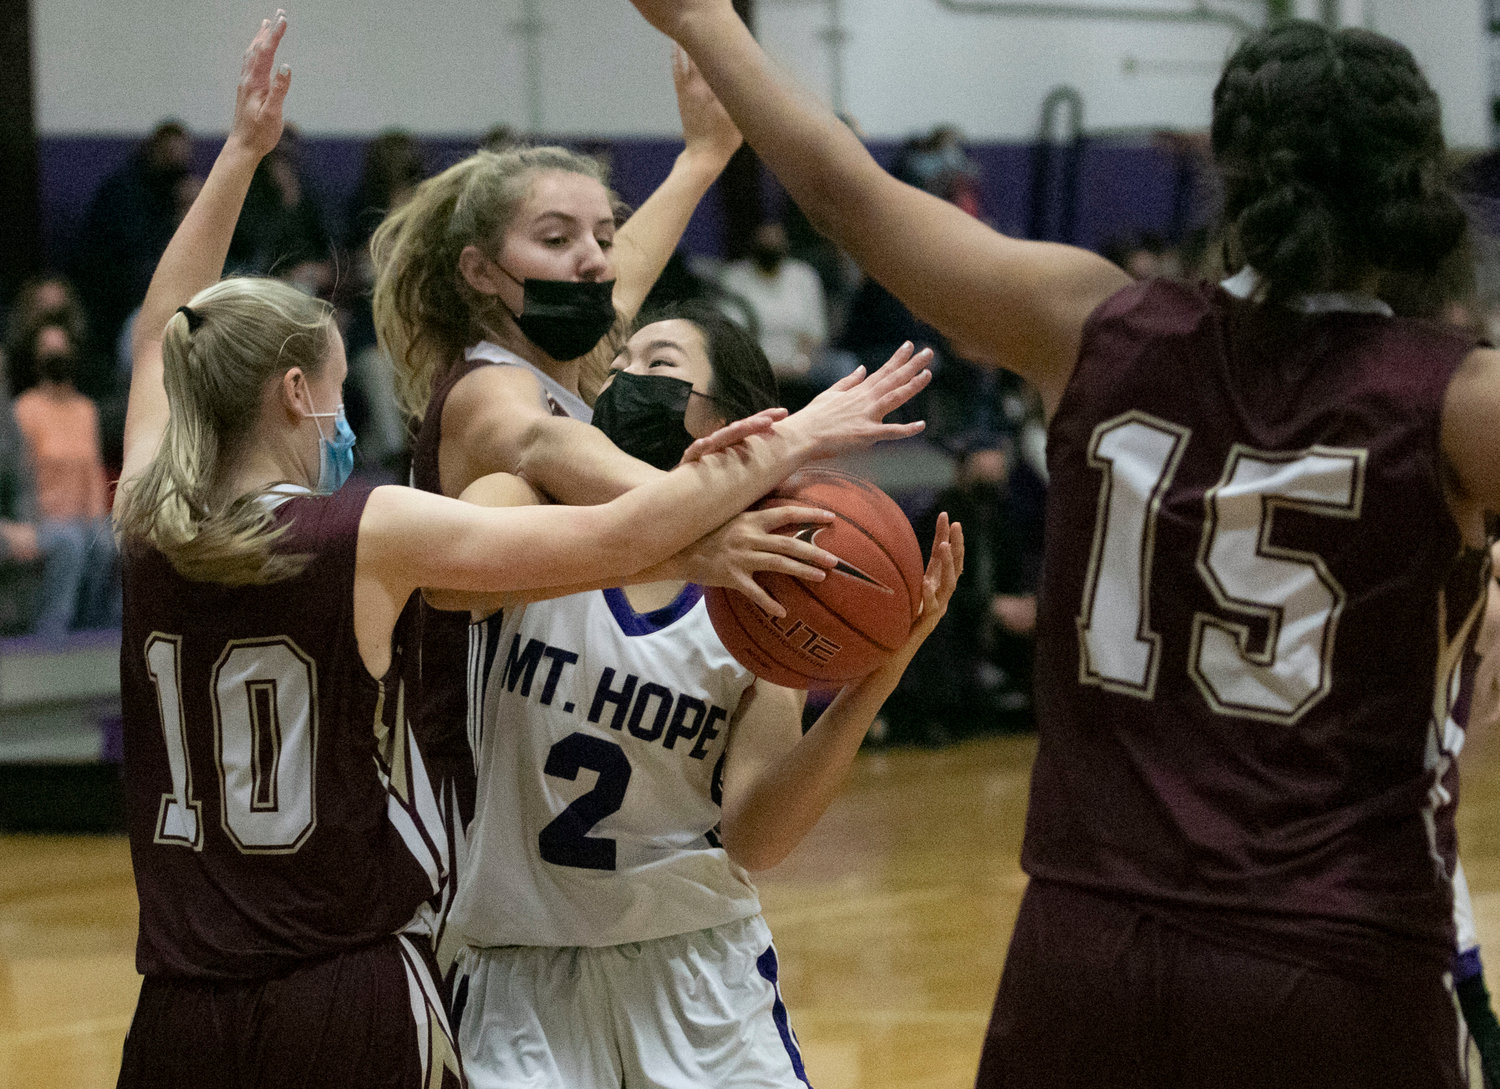 Tiverton defenders stop Elsa White as she drives in for a layup. 